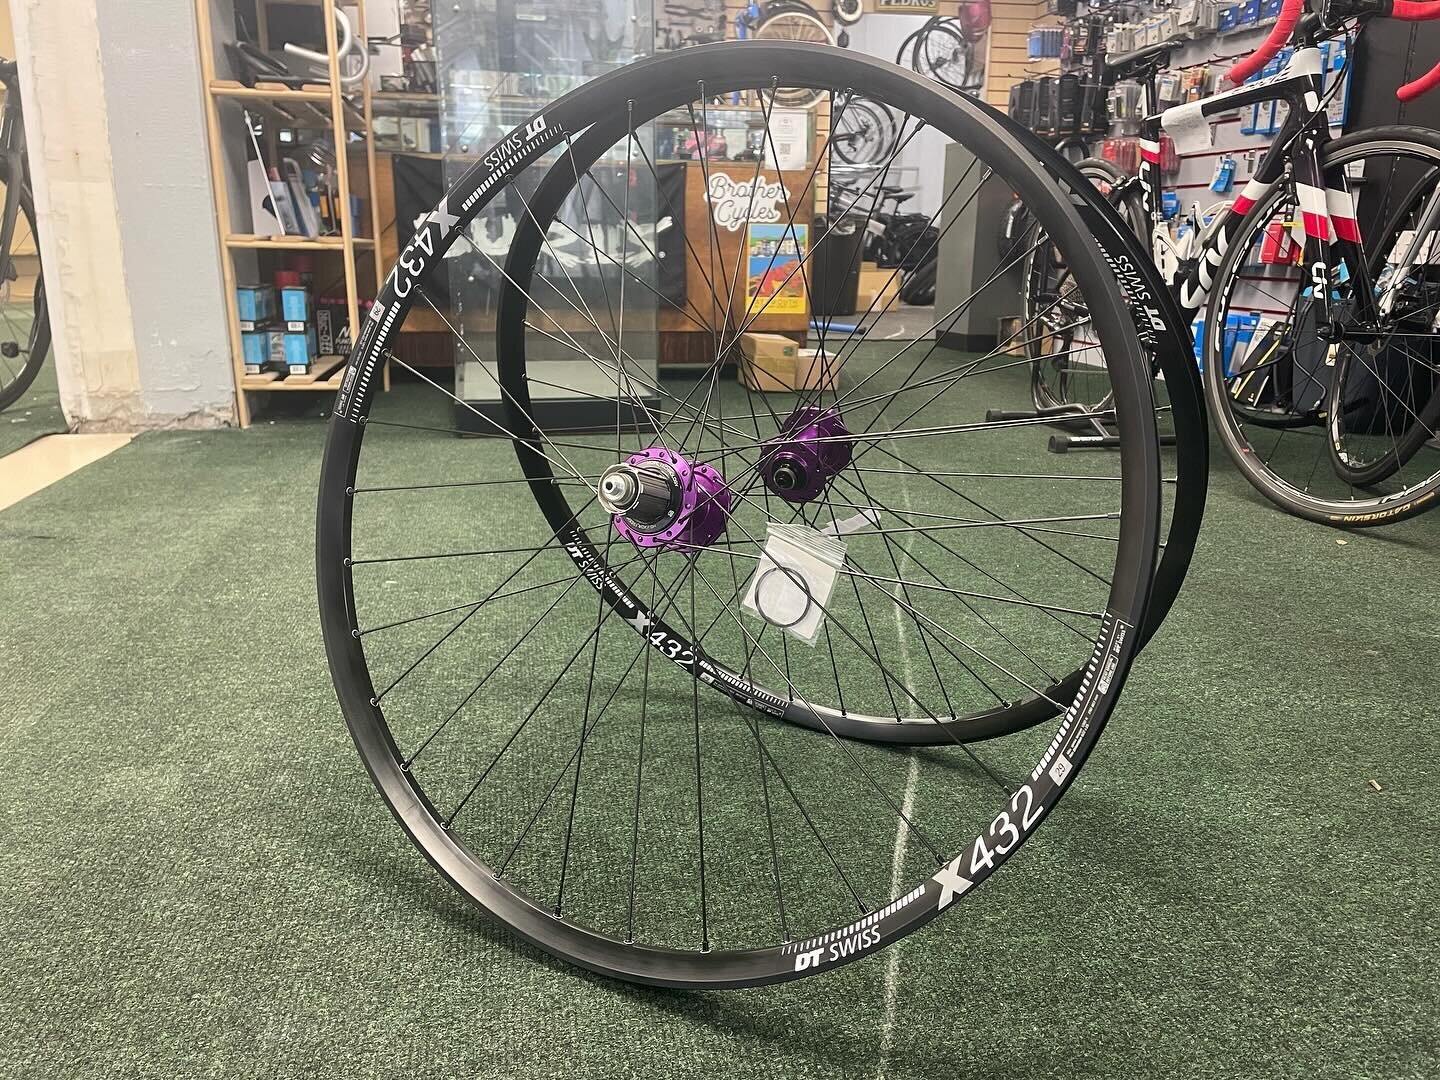 More wheel builds! This time some solid XC/all rounders for our guy Bryn. @hopetech Pro 5s in that glorious purple built into some @dtswiss X432 rims. 

Hand-built wheels are the way to go! Better in every way, and all of our wheelsets come with a ye